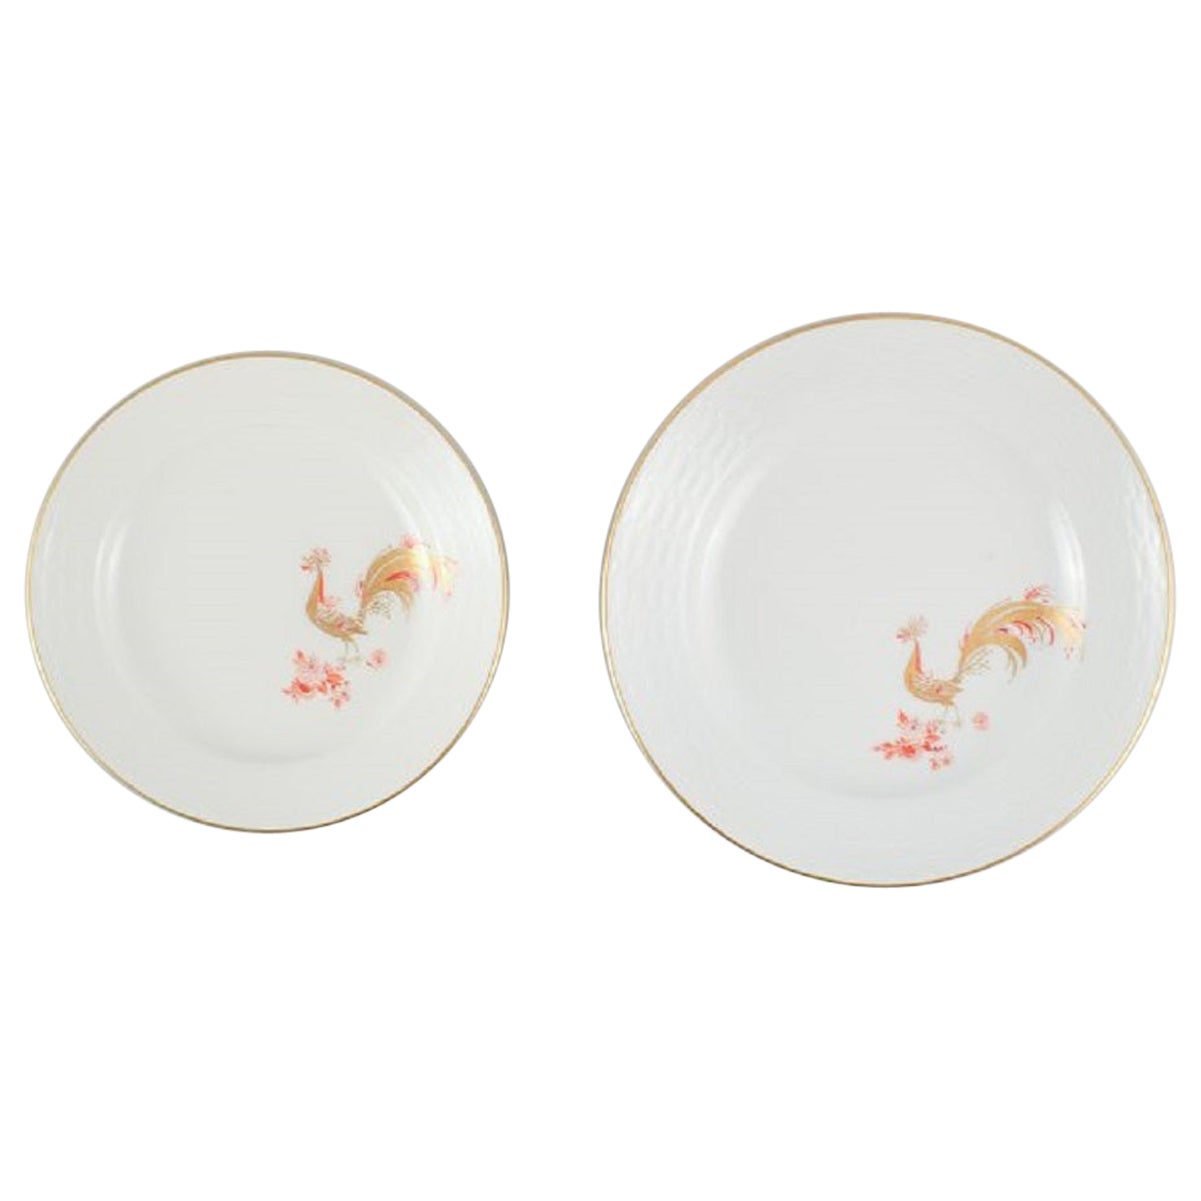 Two Rare Art Deco Meissen Plates with Hand-Painted Peacocks and Gold Decoration For Sale